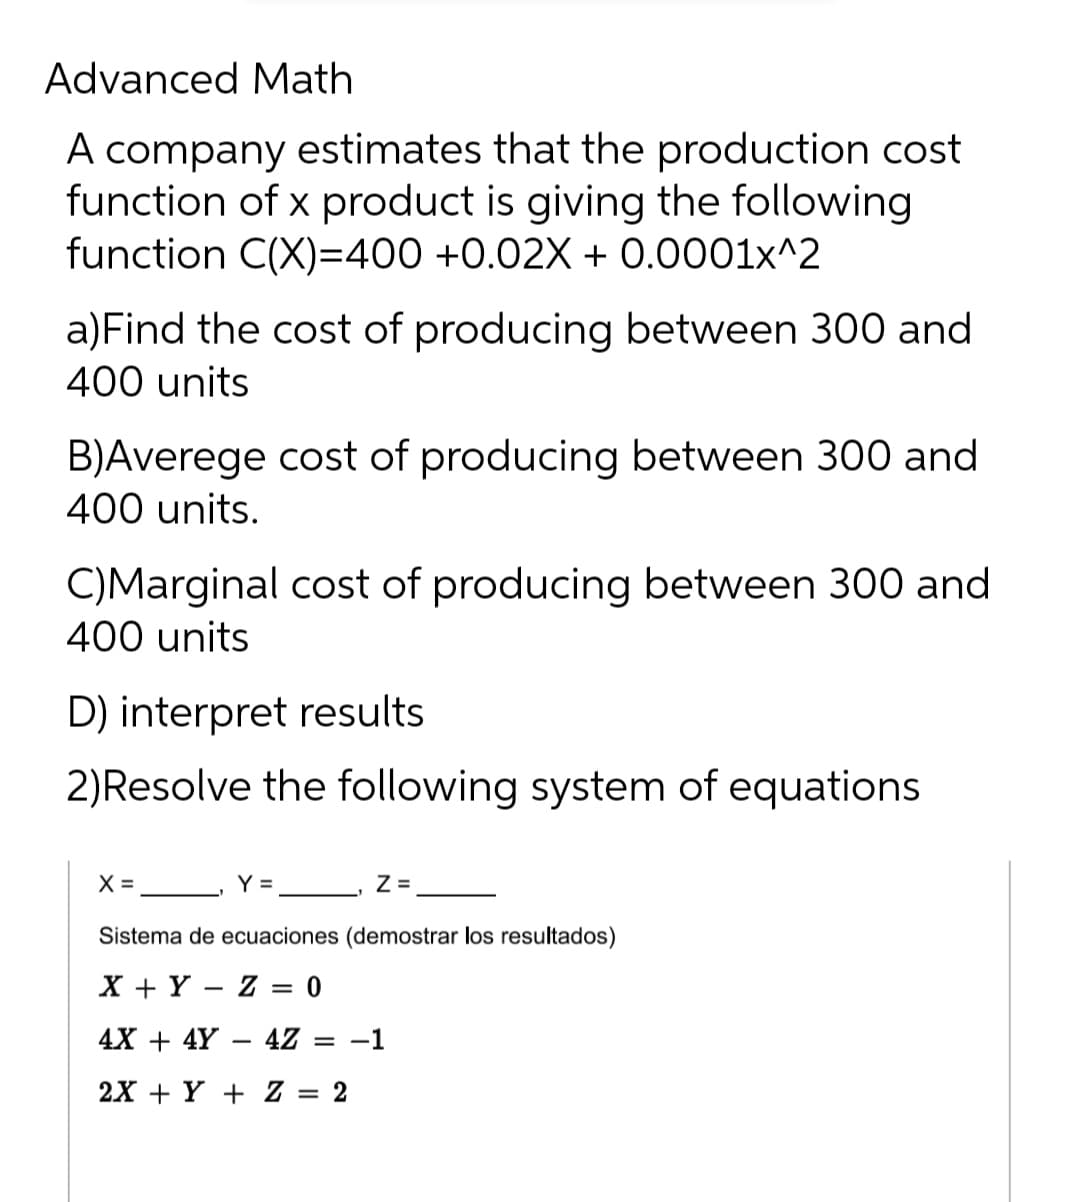 Advanced Math
A company estimates that the production cost
function of x product is giving the following
function C(X)=400 +0.02X + 0.0001x^2
a)Find the cost of producing between 300 and
400 units
B)Averege cost of producing between 300 and
400 units.
C)Marginal cost of producing between 300 and
400 units
D) interpret results
2)Resolve the following system of equations
X = Y= __ z=,
Sistema de ecuaciones (demostrar los resultados)
X + Y – Z = 0
4X + 4Y – 4Z
-1
2X + Y + Z = 2
%3D
